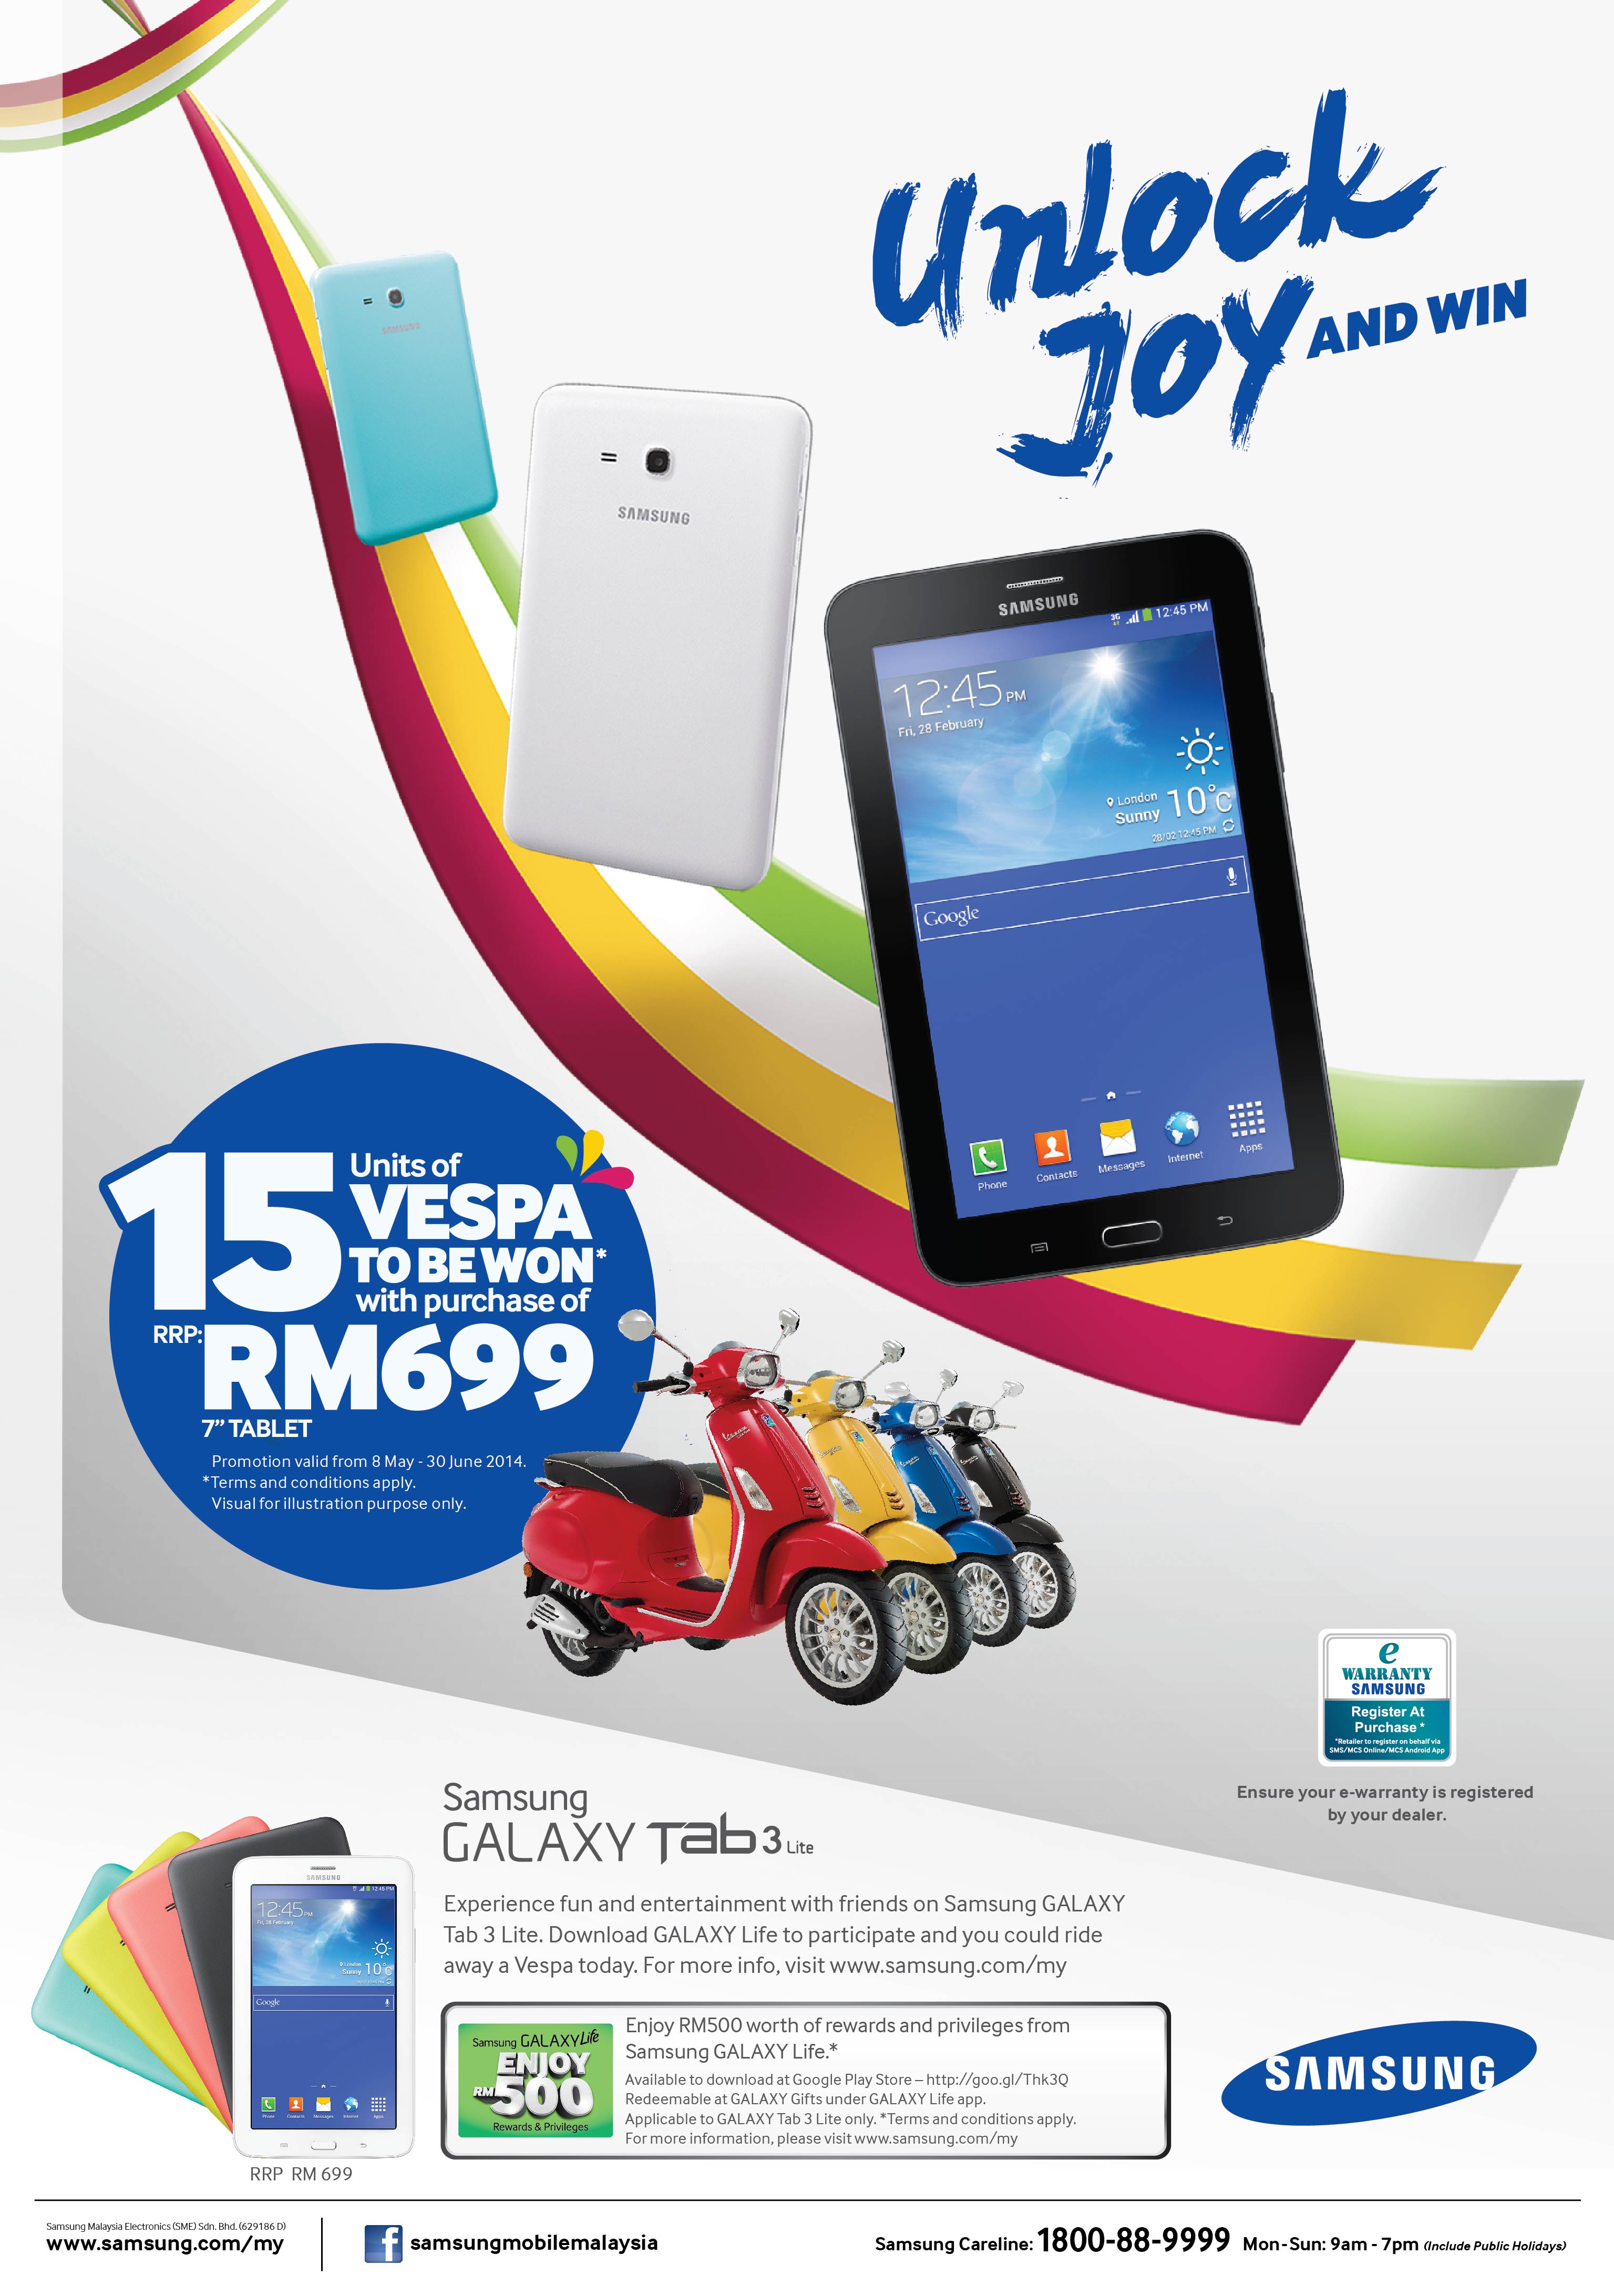 Buy A Samsung Galaxy Tab 3 Lite And Stand A Chance To Win 1 of 15 Vespas - Lowyat.NET